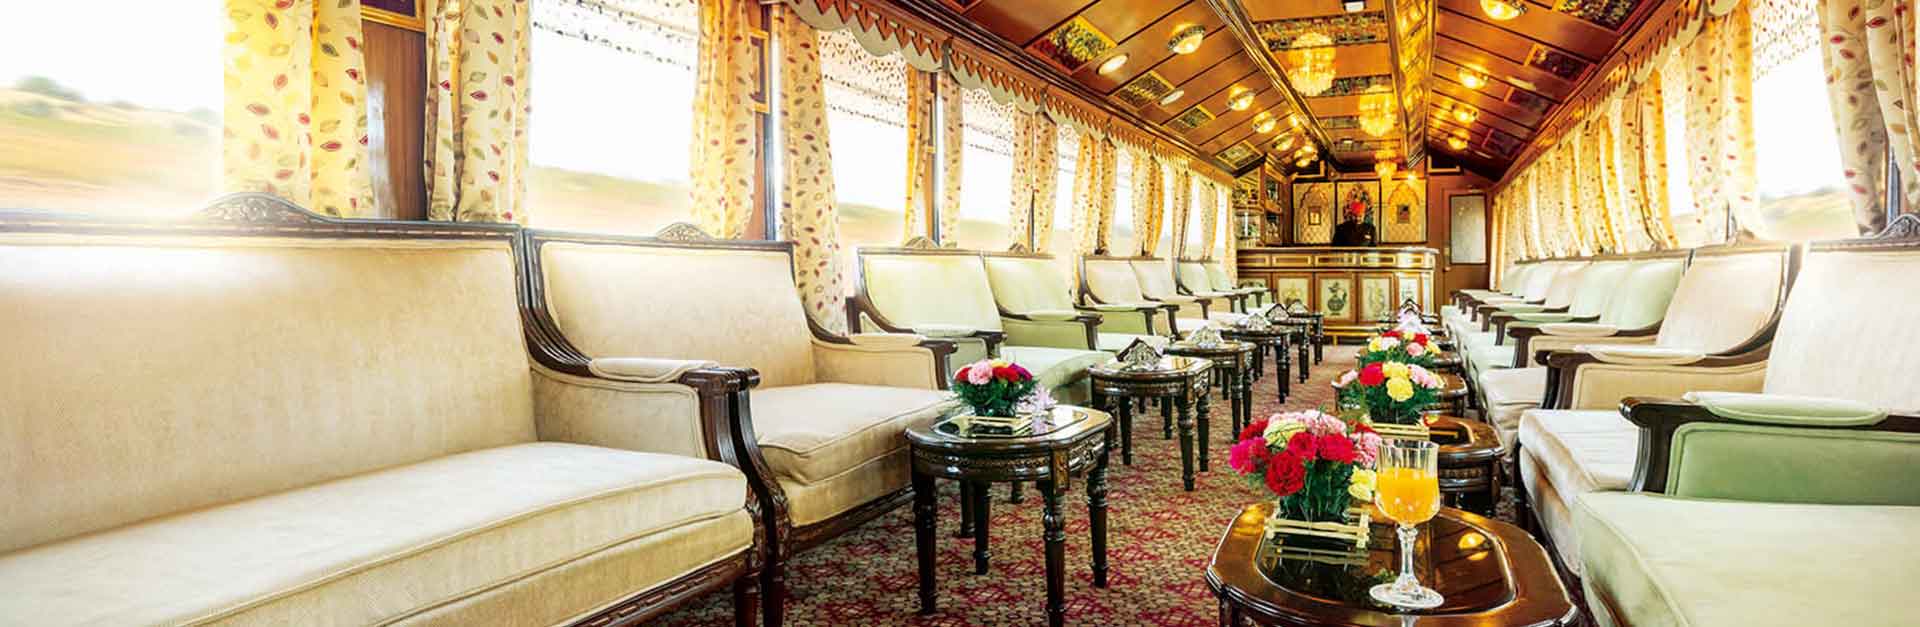 palace on wheels package